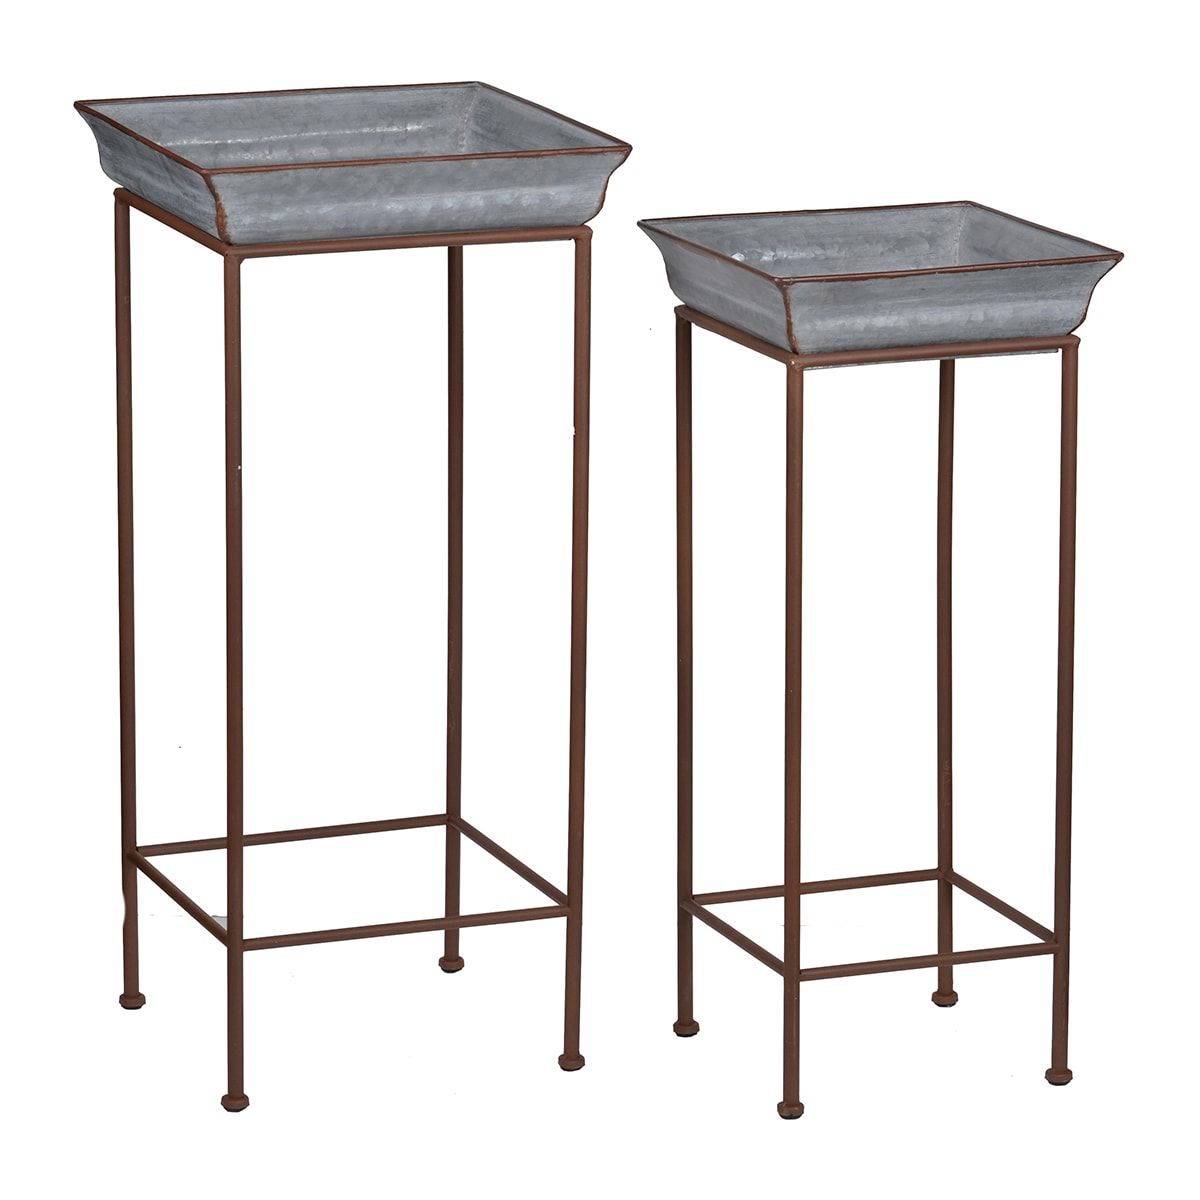 Most Recent Iron Square Plant Stands With A&b Home Shelburne Plant Stands 30.7 In H X  (View 3 of 15)